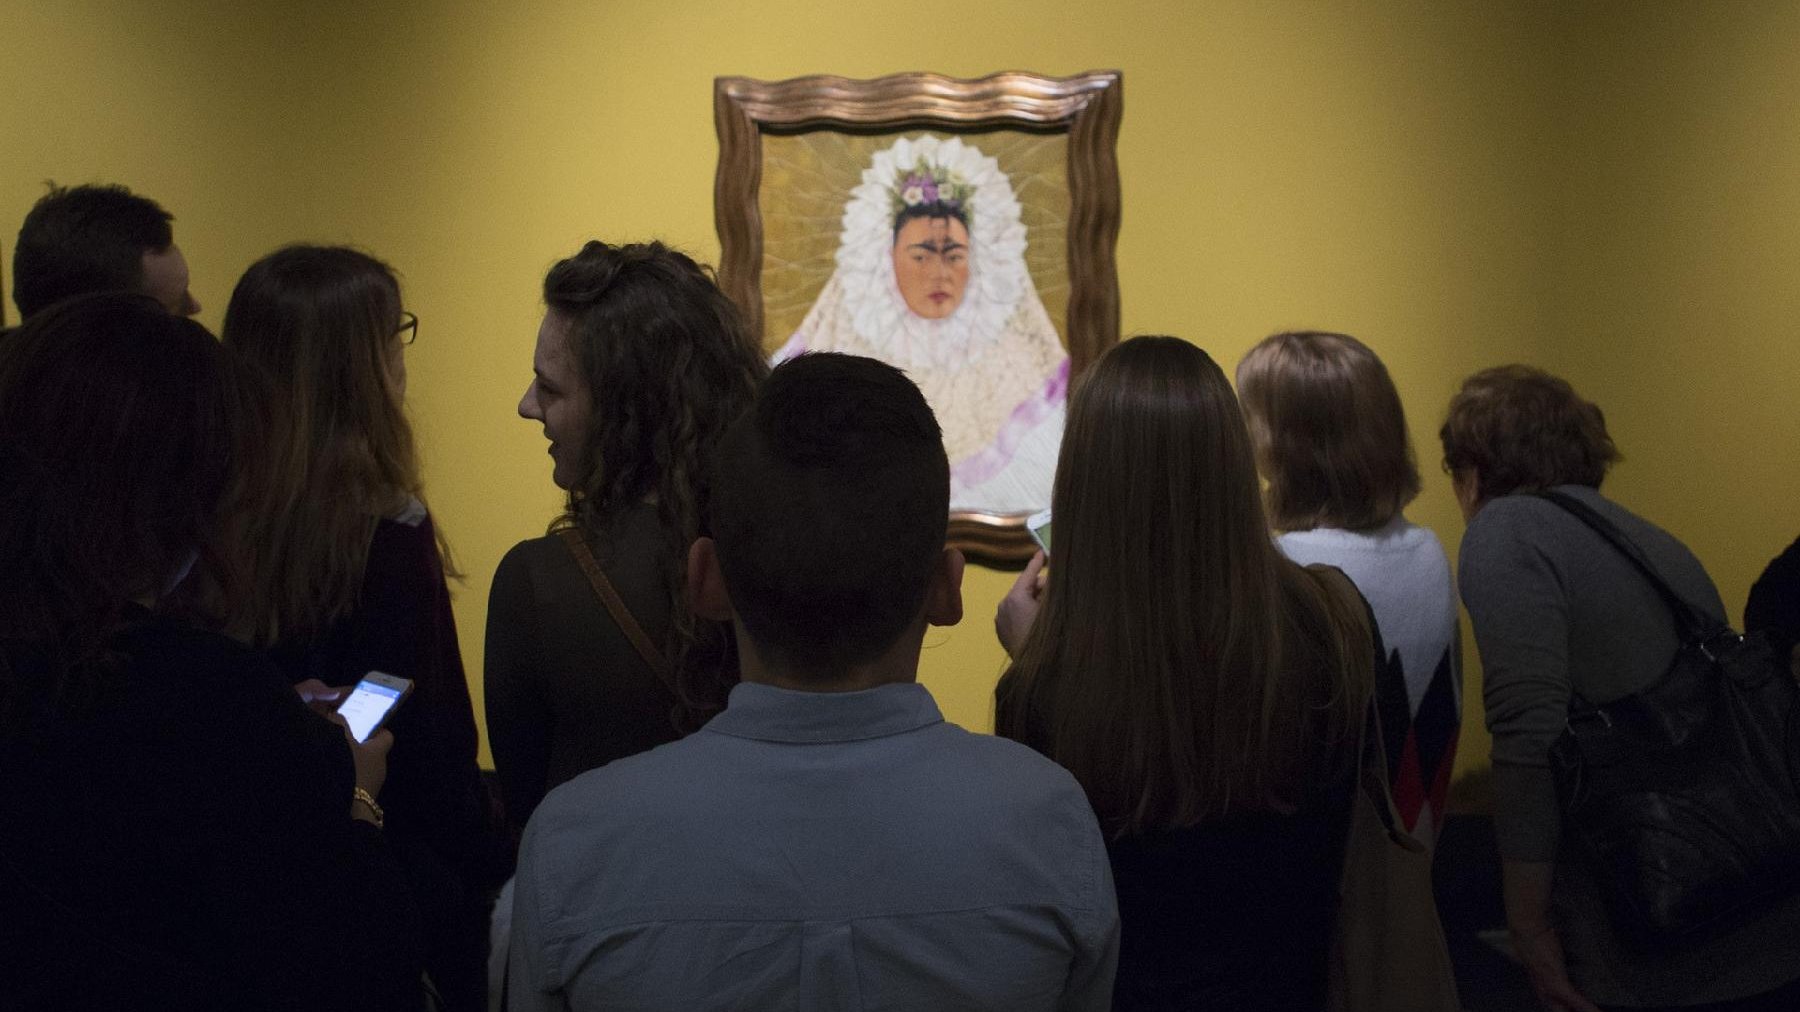 Photo from the exhibition: a few people watching Frida Kahlo's portrait